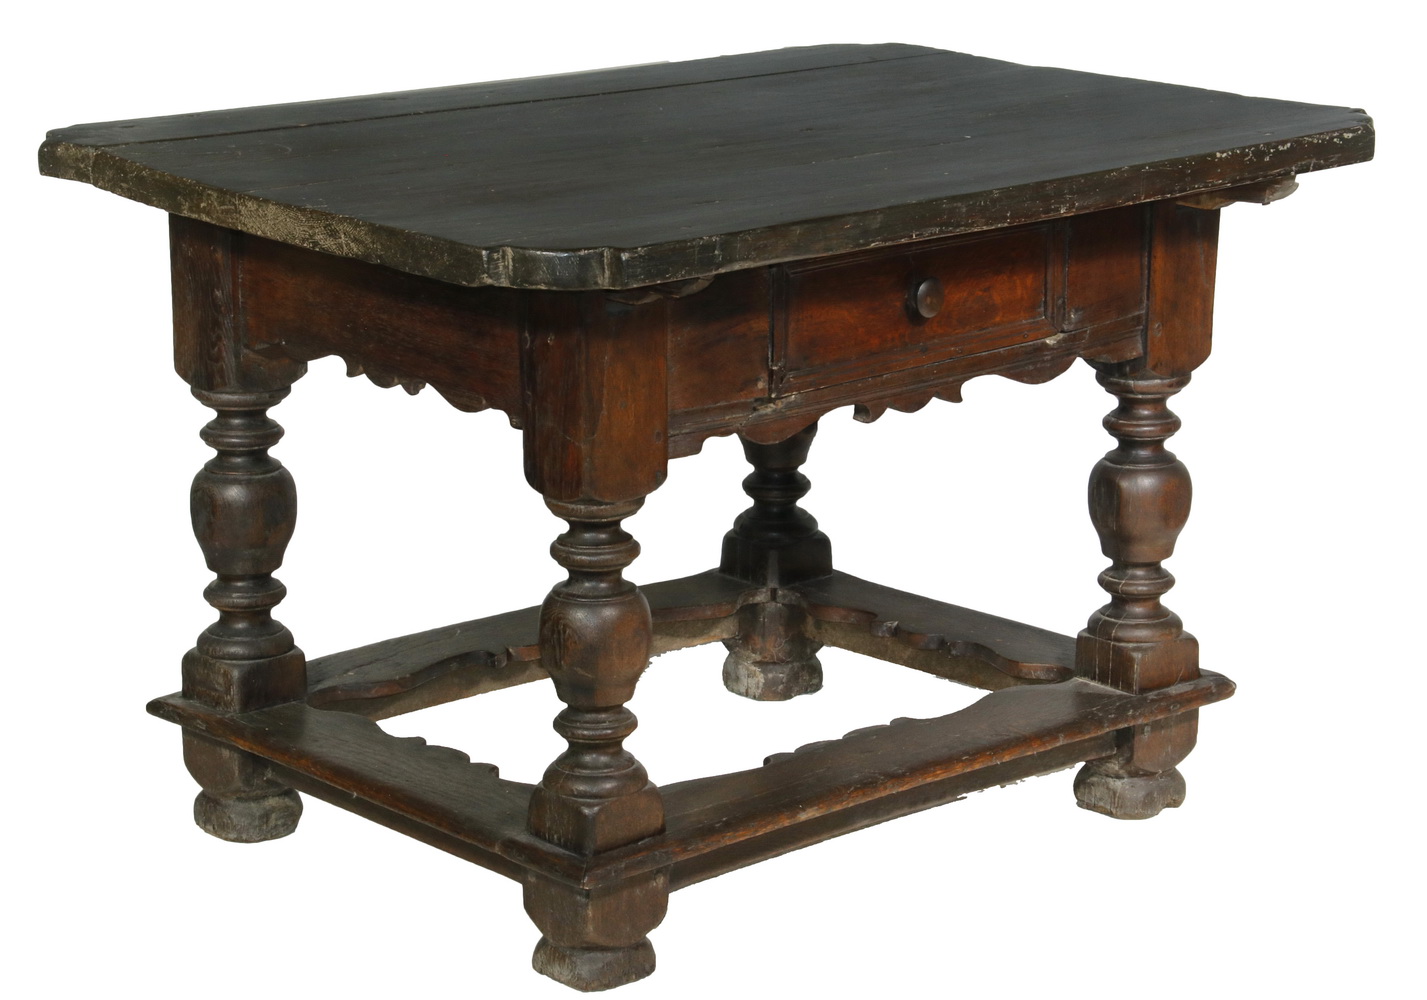 EARLY TAVERN TABLE 17th c One Drawer 2b4c38